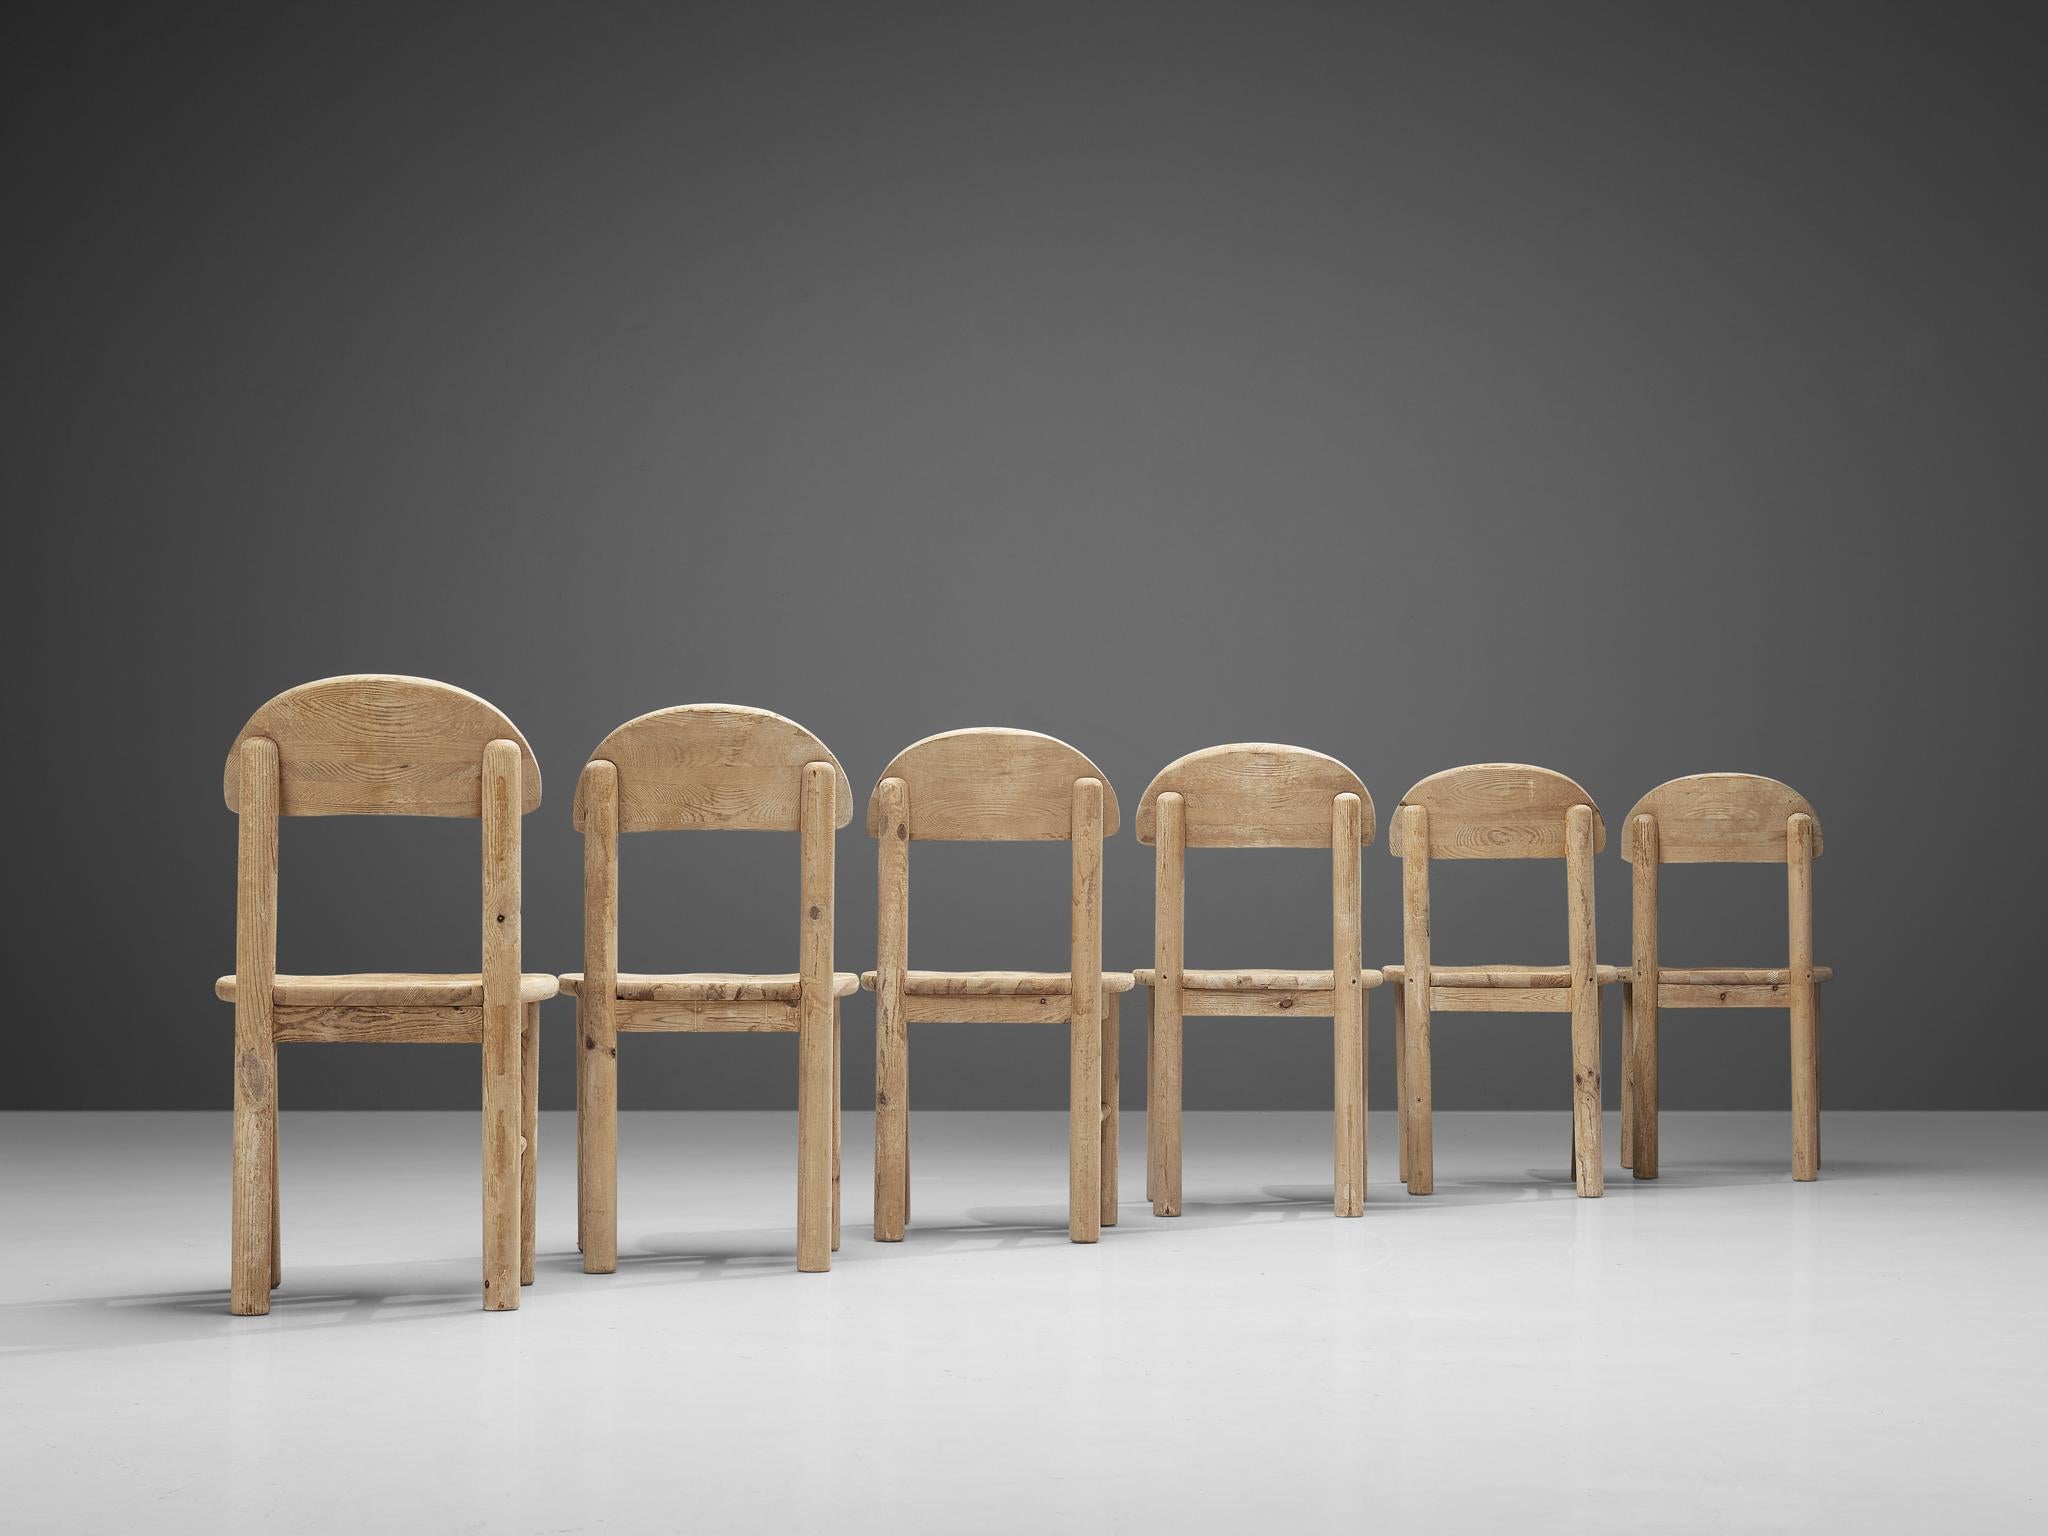 Dining chairs, pine, Denmark, 1970s. 

Large set of six beautiful, organic and natural dining chairs in light stained solid pine. A simplistic design with a round seating and attention for the natural expression and grain of the wood. These chairs